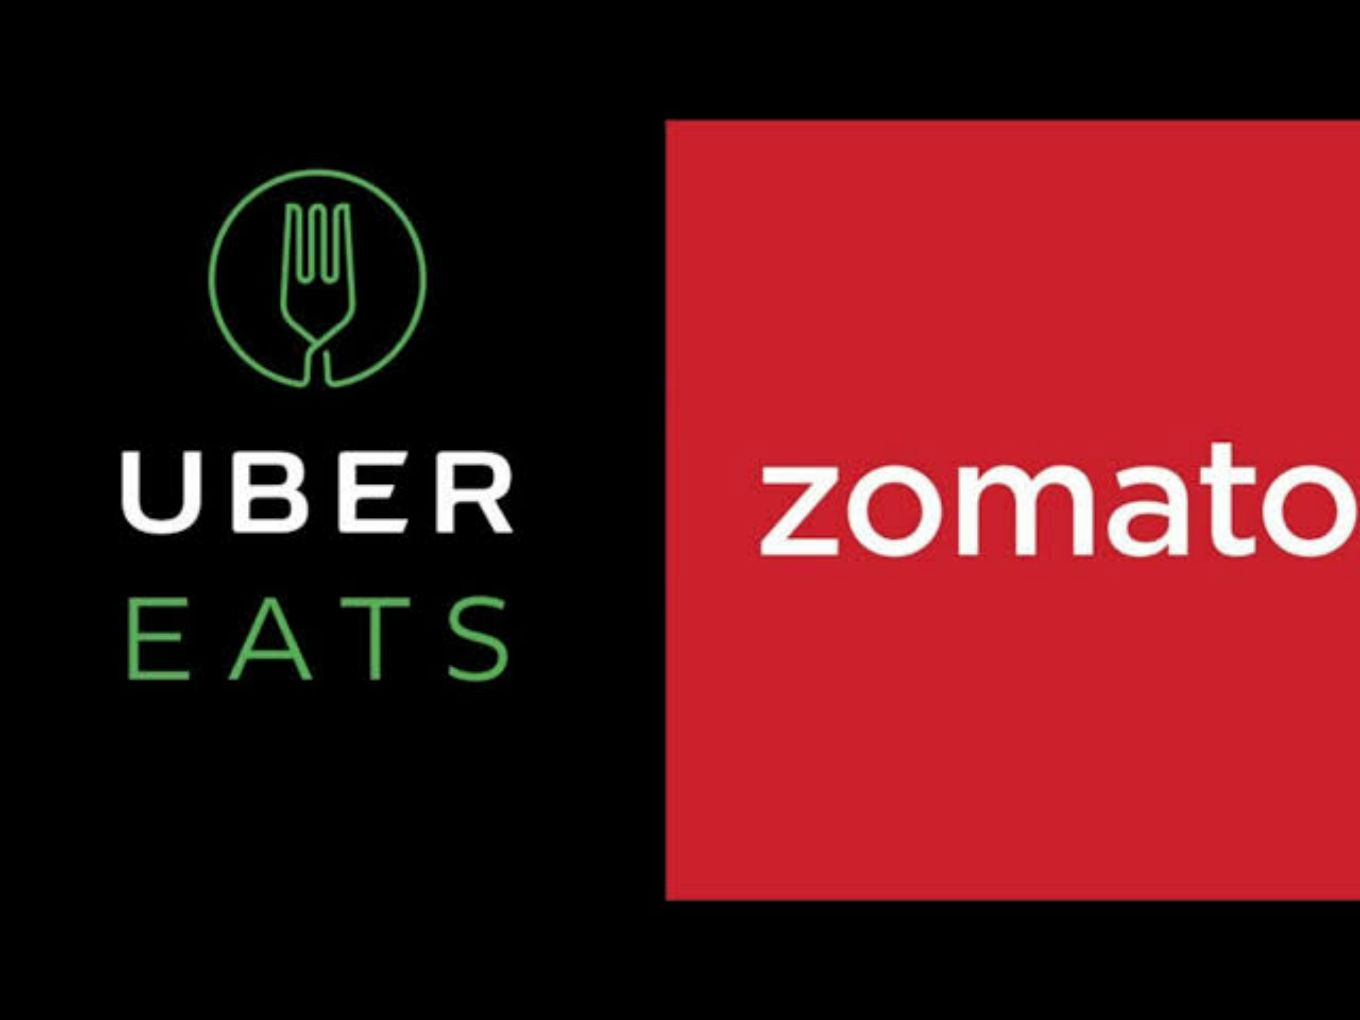 Uber Eats Deal: Here’s How Much Uber’s 9.6% Stake In Zomato Is Worth